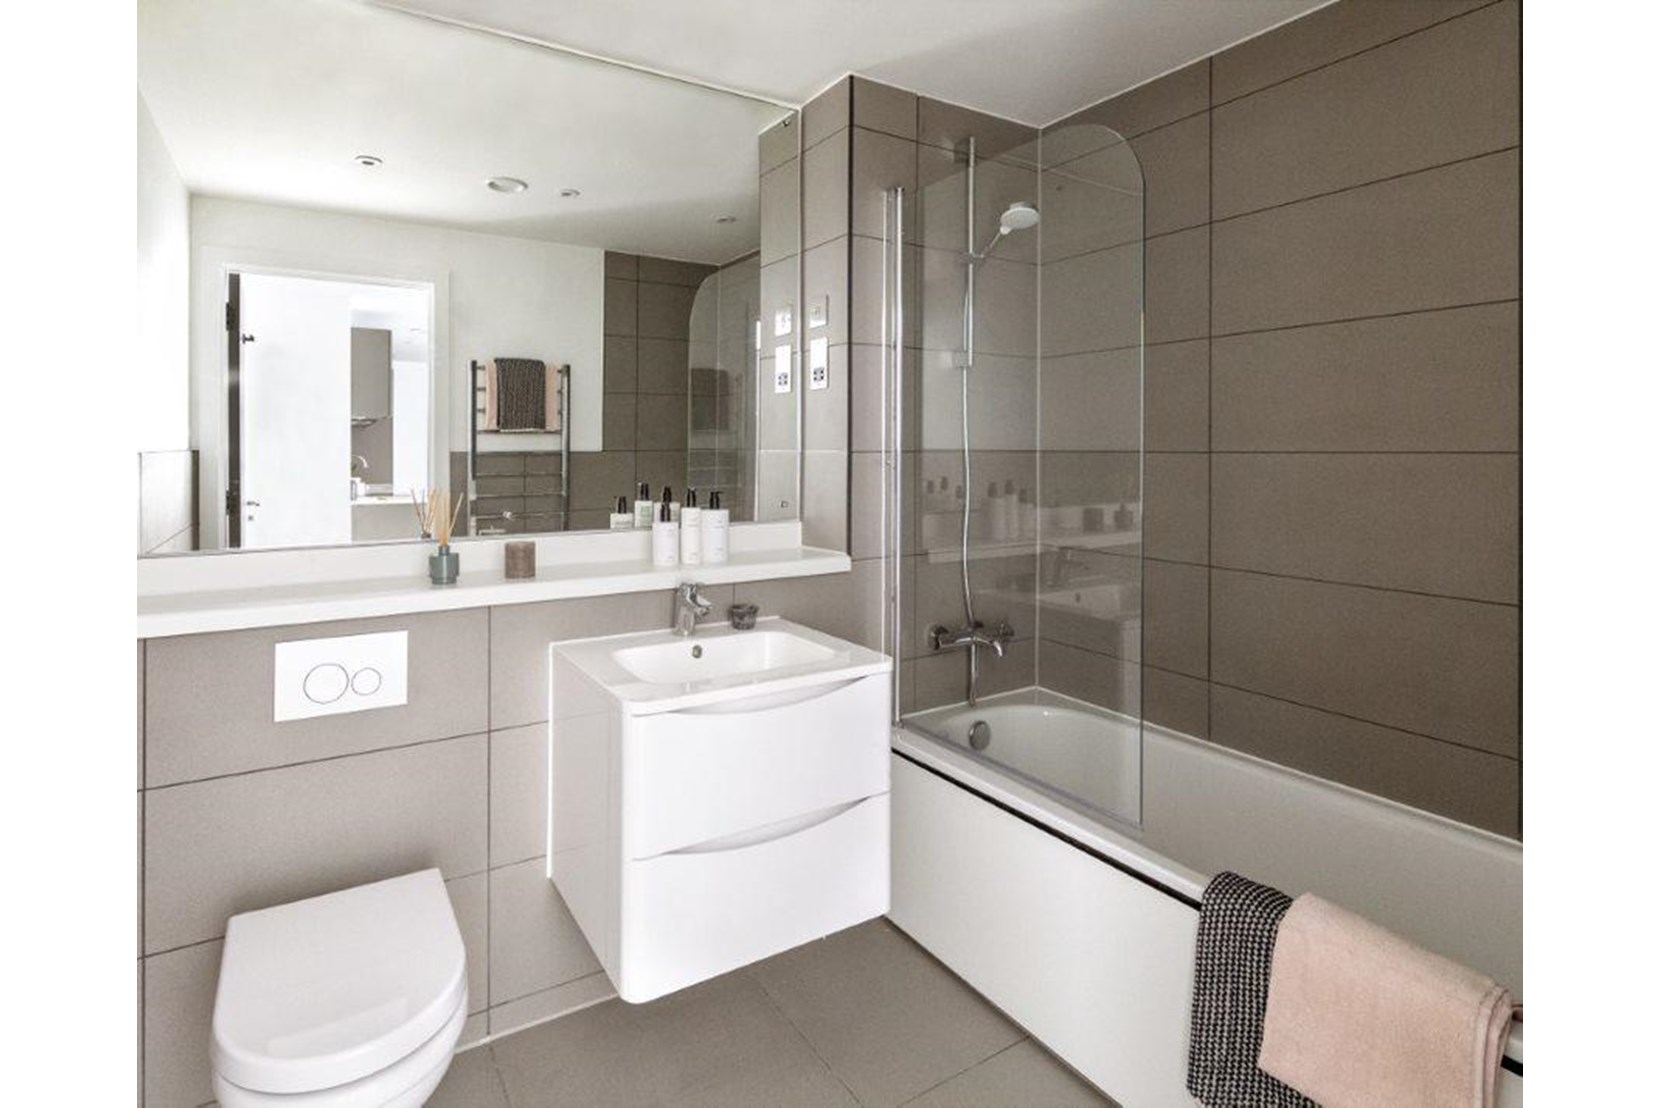 Apartments to Rent by JLL at Landrow Place, Birmingham, B3, bathroom